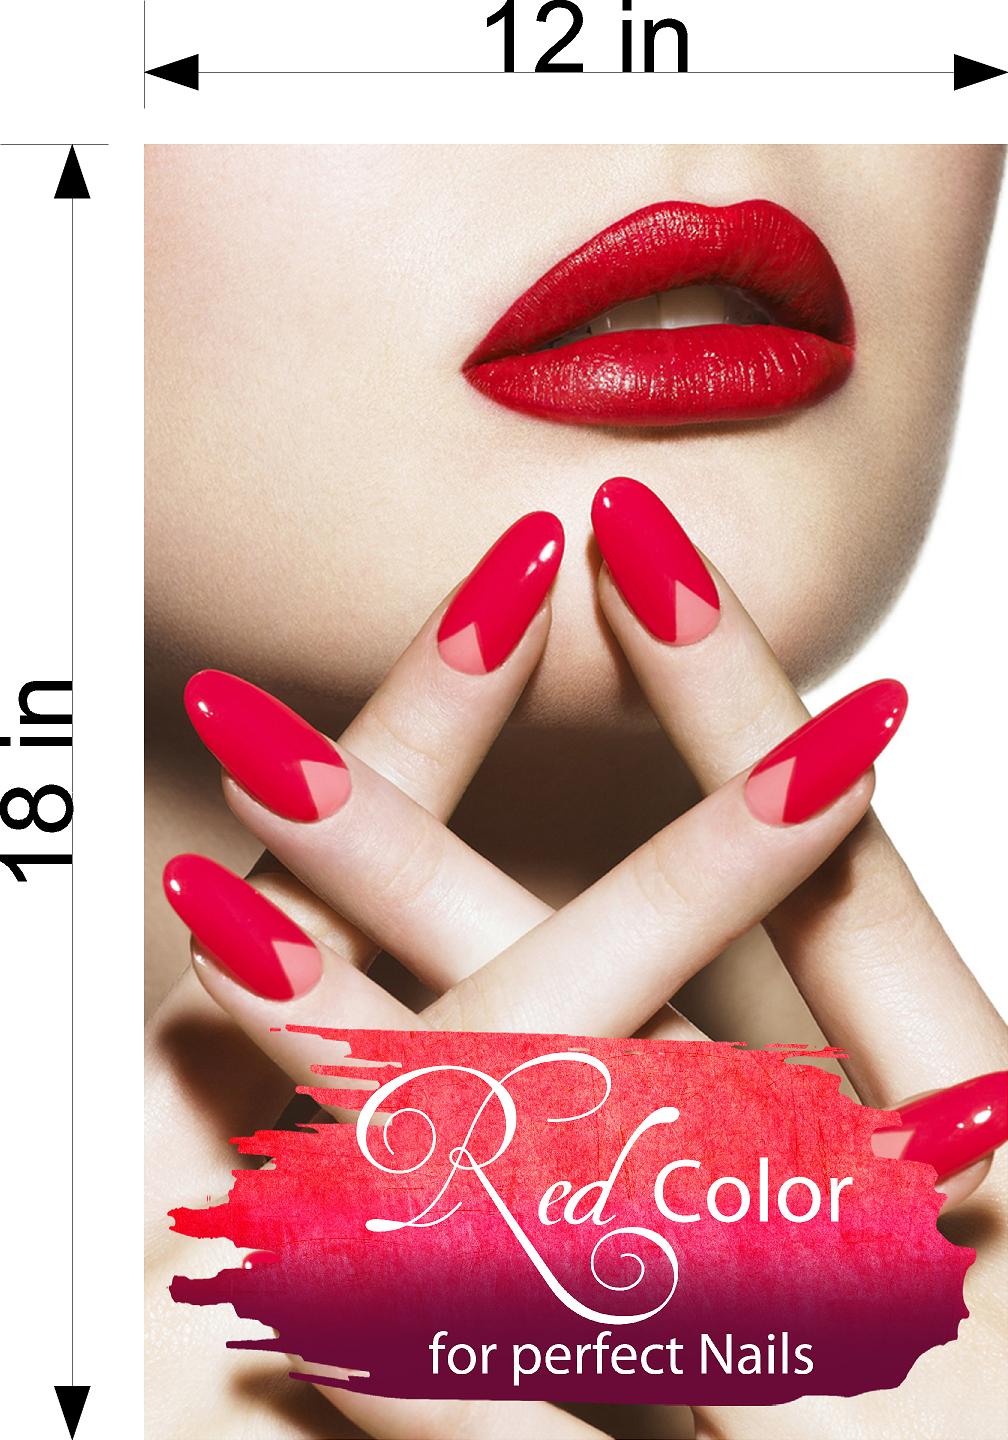 Salon 21 Photo-Realistic Paper Poster Premium Interior Inside Sign Wall Window Non-Laminated Nail Manicure Red Vertical